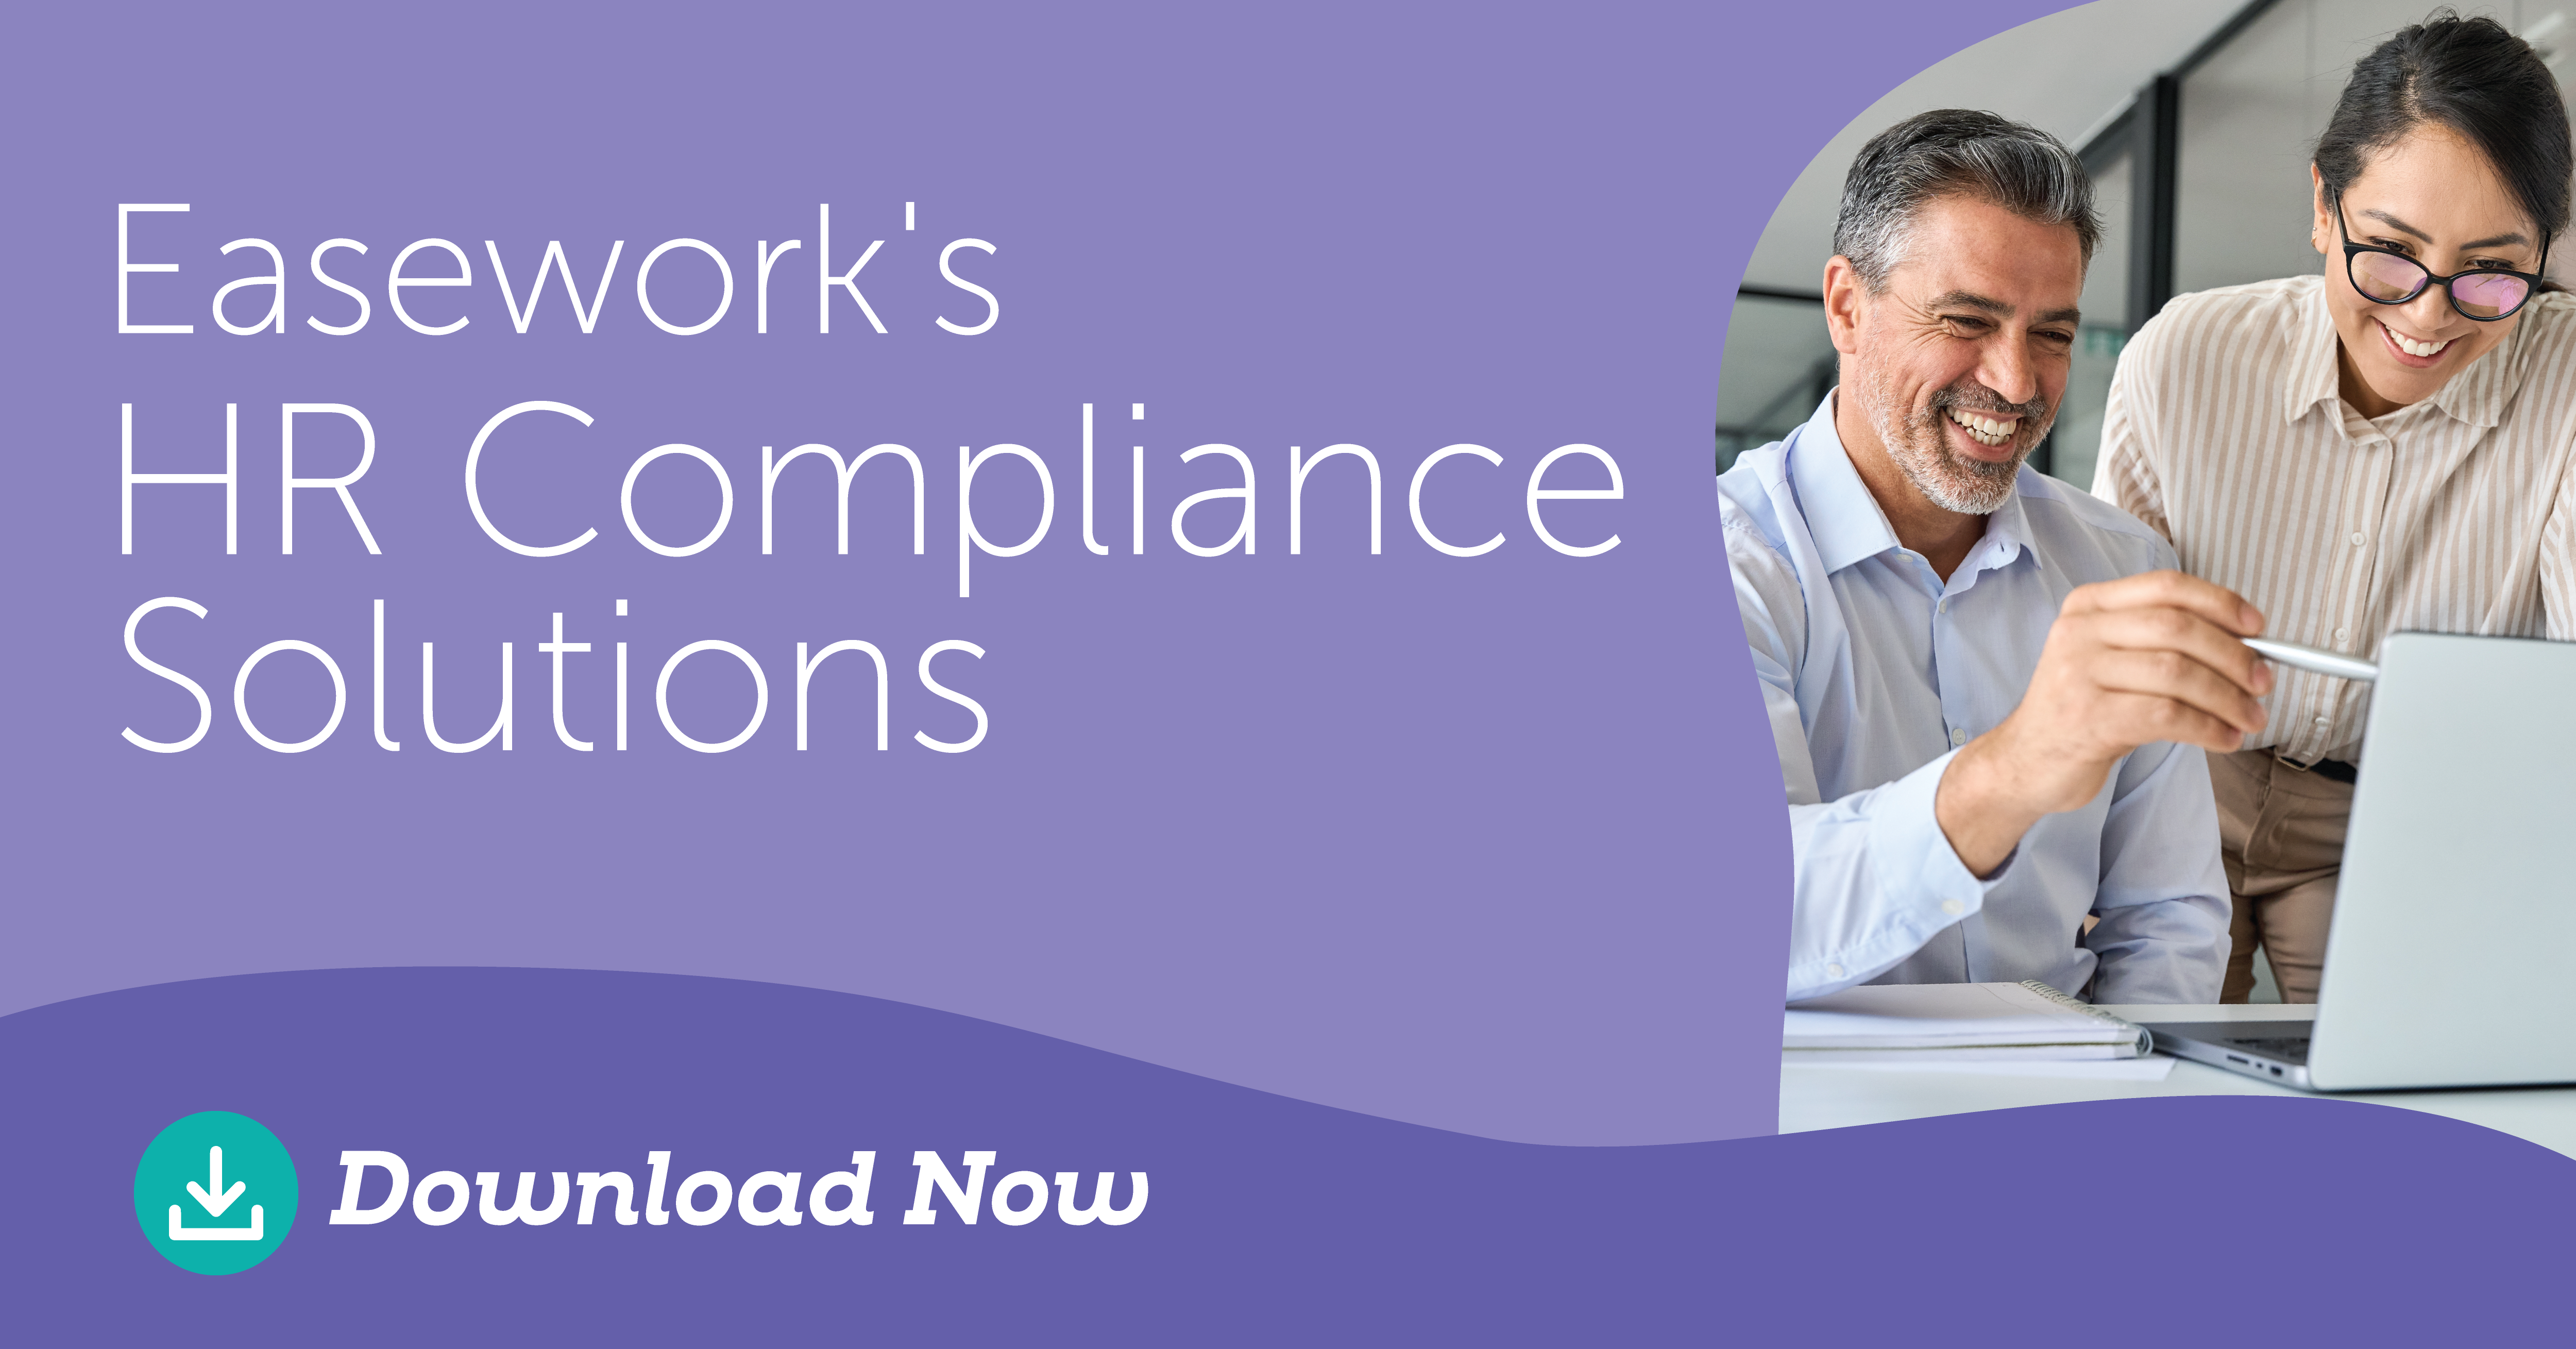 Easework's HR Compliance Solutions